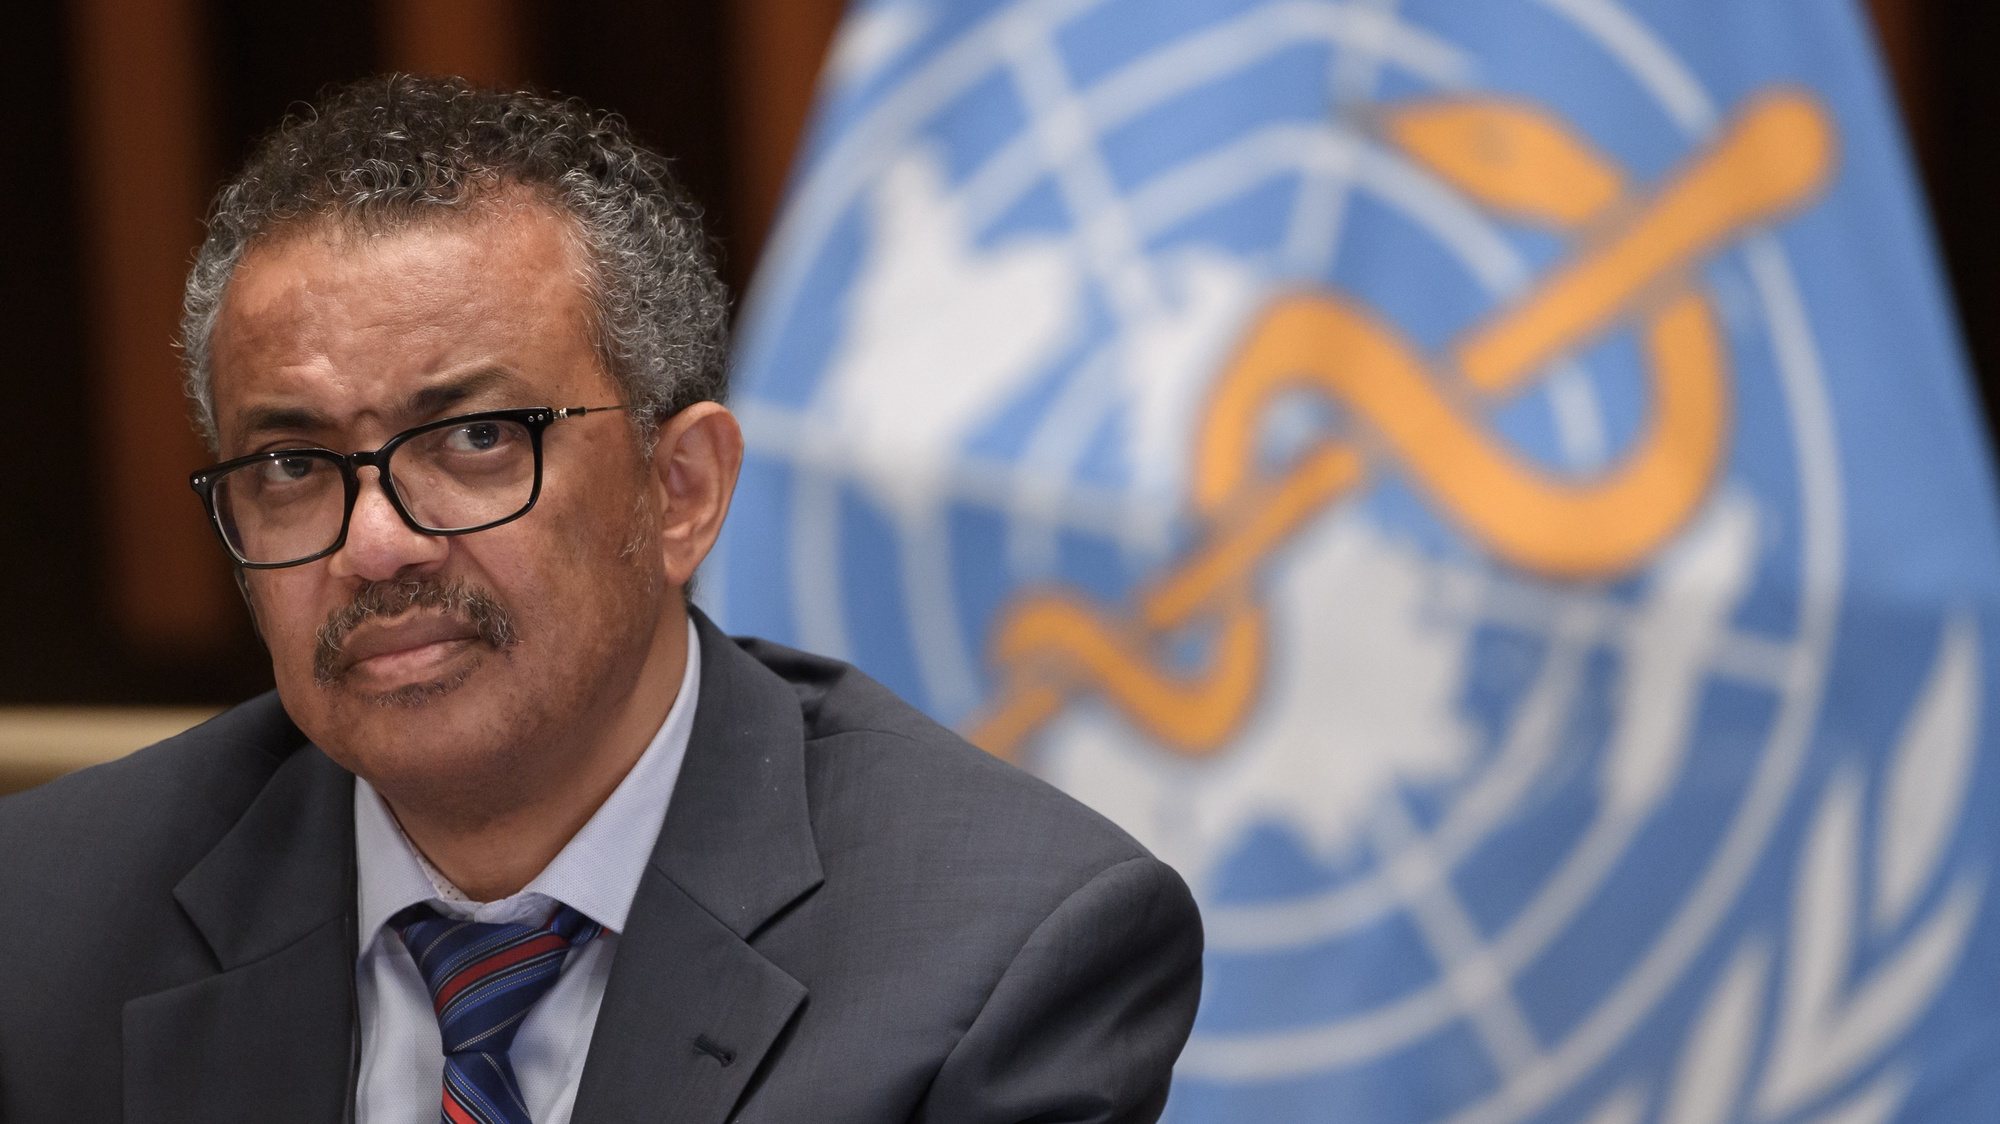 epa08525392 World Health Organization (WHO) Director-General Tedros Adhanom Ghebreyesus attends a press conference organized by the Geneva Association of United Nations Correspondents (ACANU) amid the COVID-19 pandemic, caused by the novel coronavirus, at the WHO headquarters in Geneva, Switzerland, 03 July 2020.  EPA/FABRICE COFFRINI